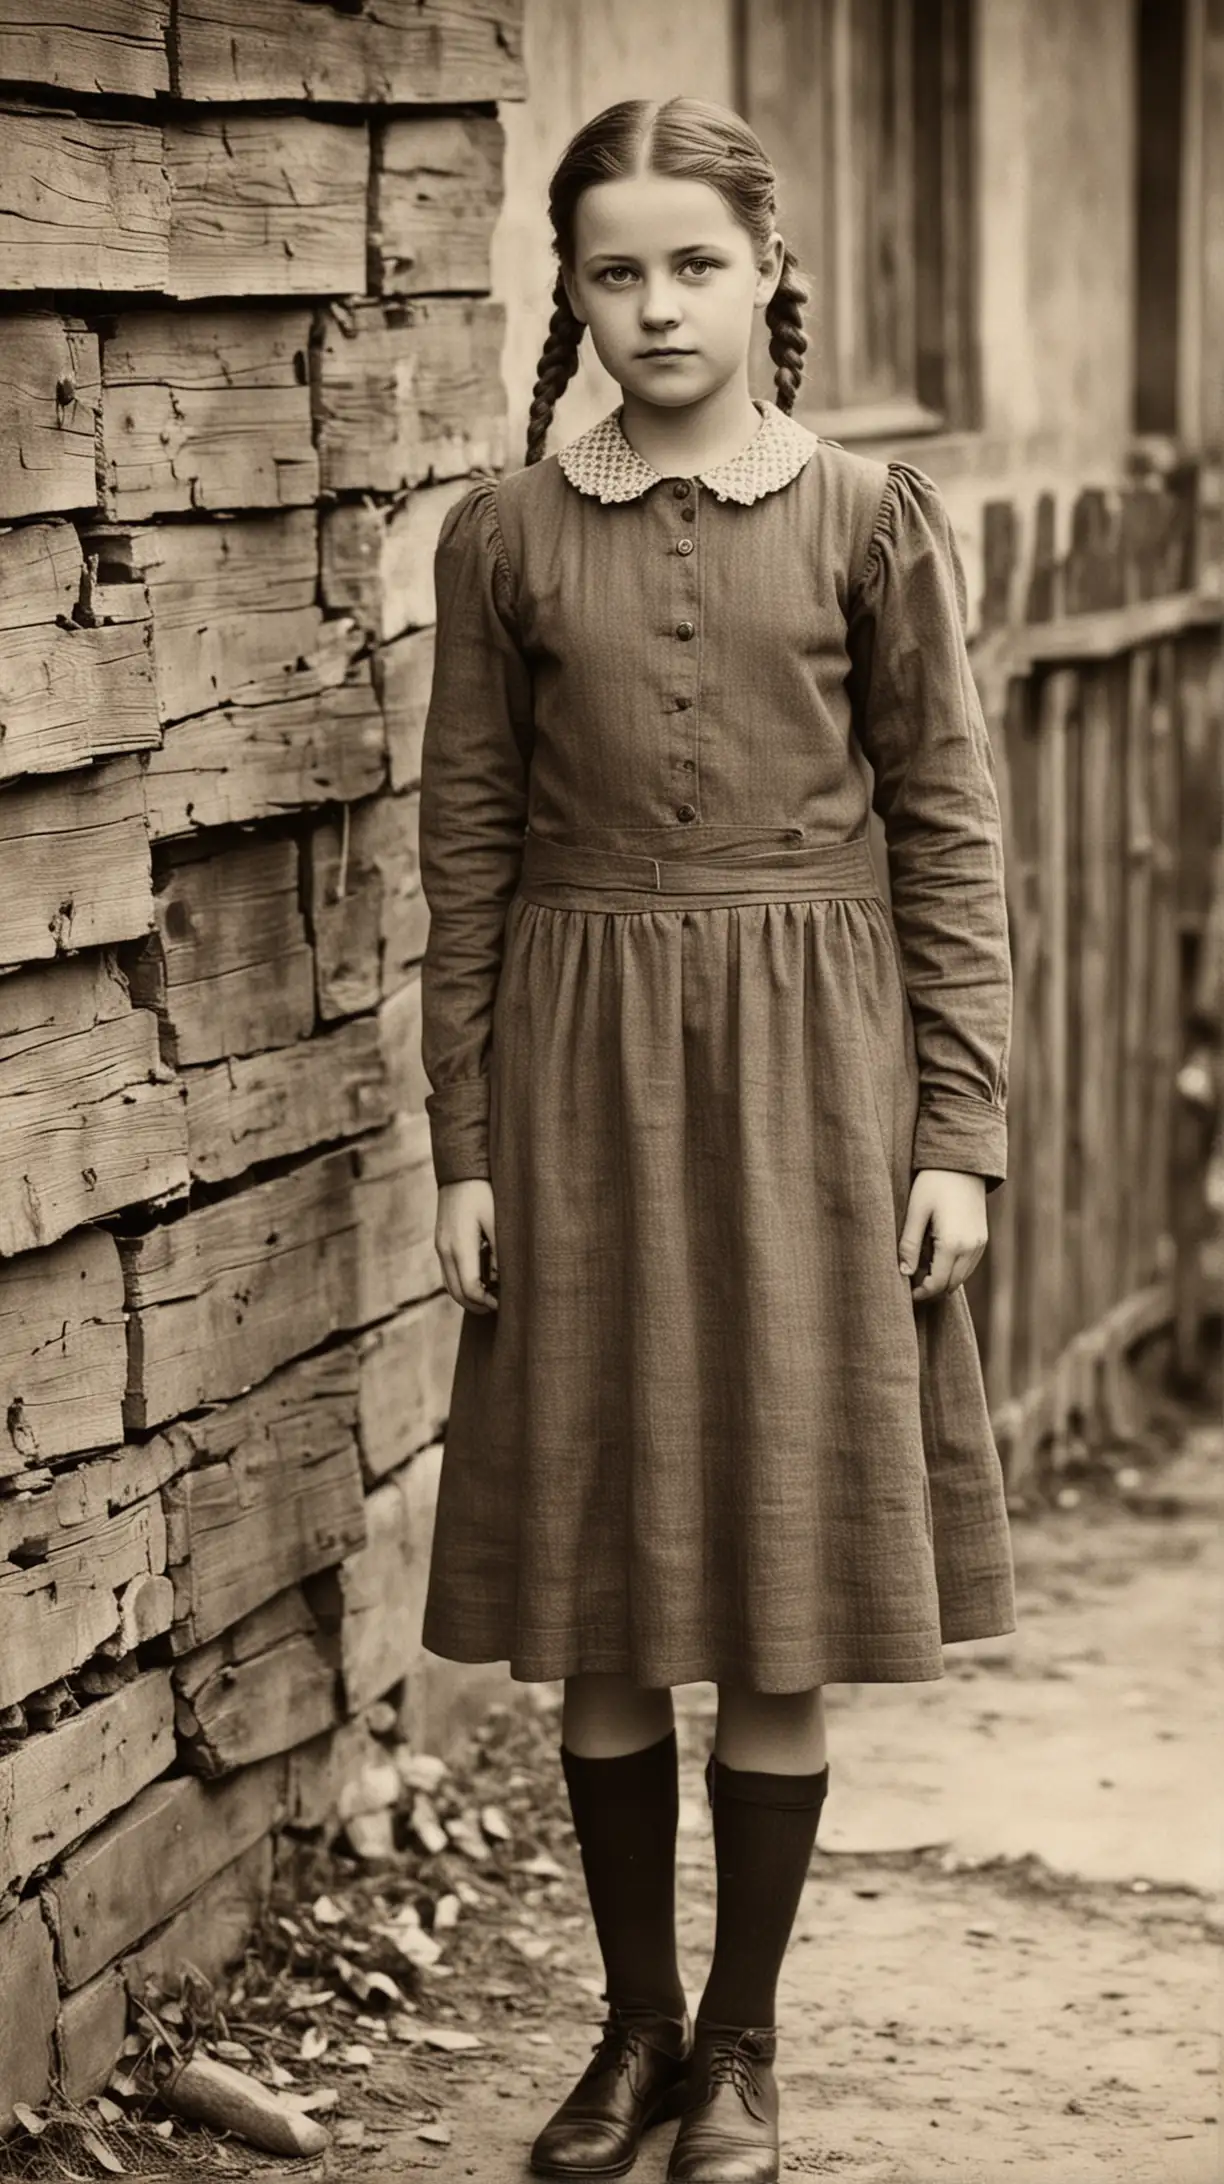 Irma Grese as a Young Girl: Create an image of Irma Grese as a child in the late 1920s or early 1930s, in a rural German village. She should be dressed in simple, modest clothing typical of the era, playing outdoors with other children in a rustic setting.